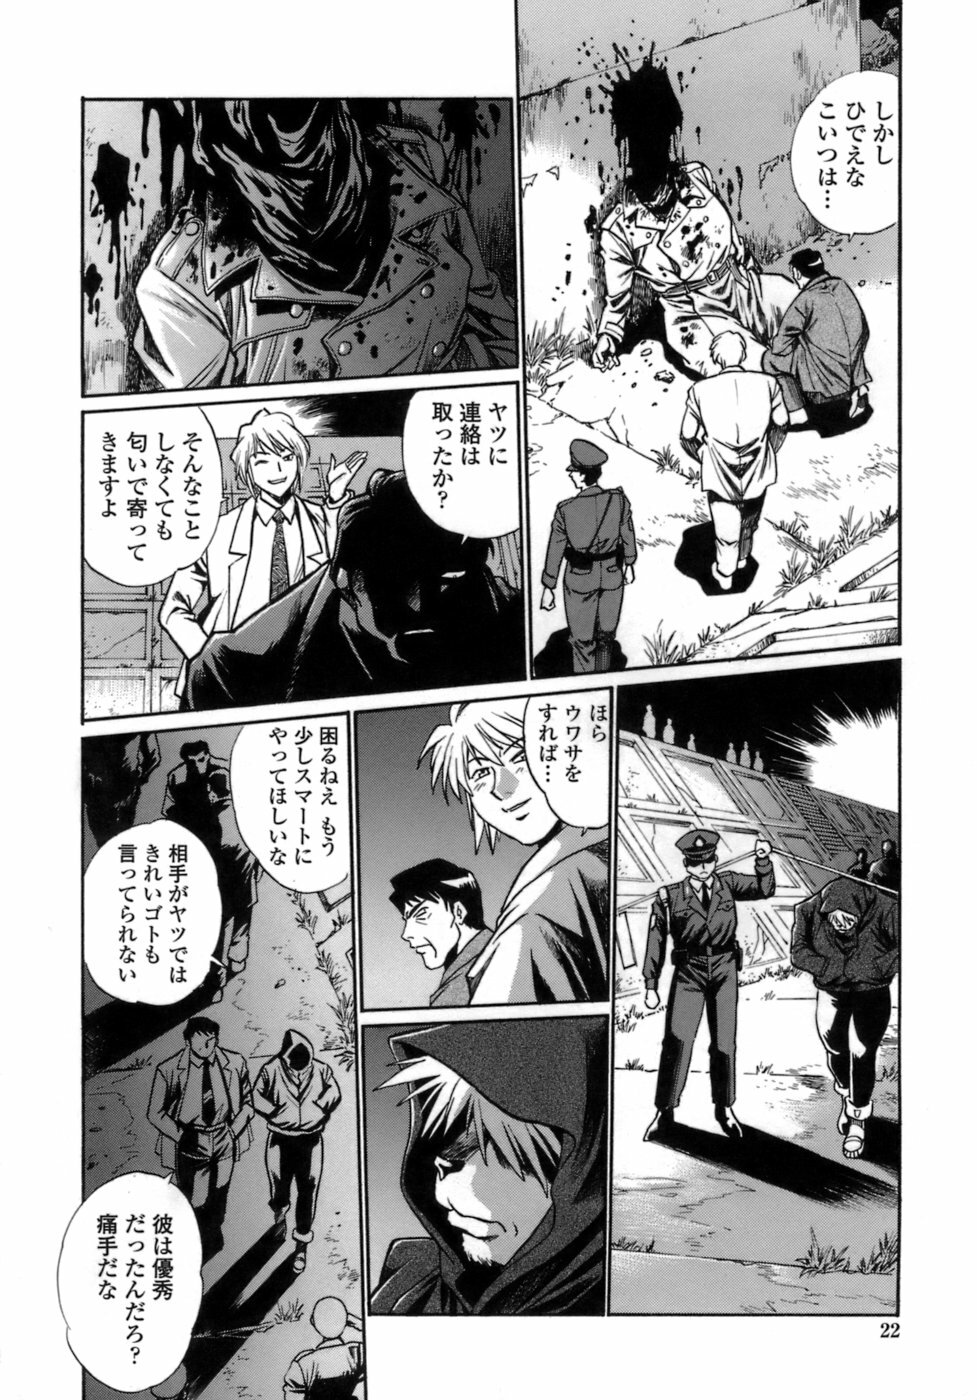 [Manabe Jouji] Tail Chaser 1 page 20 full